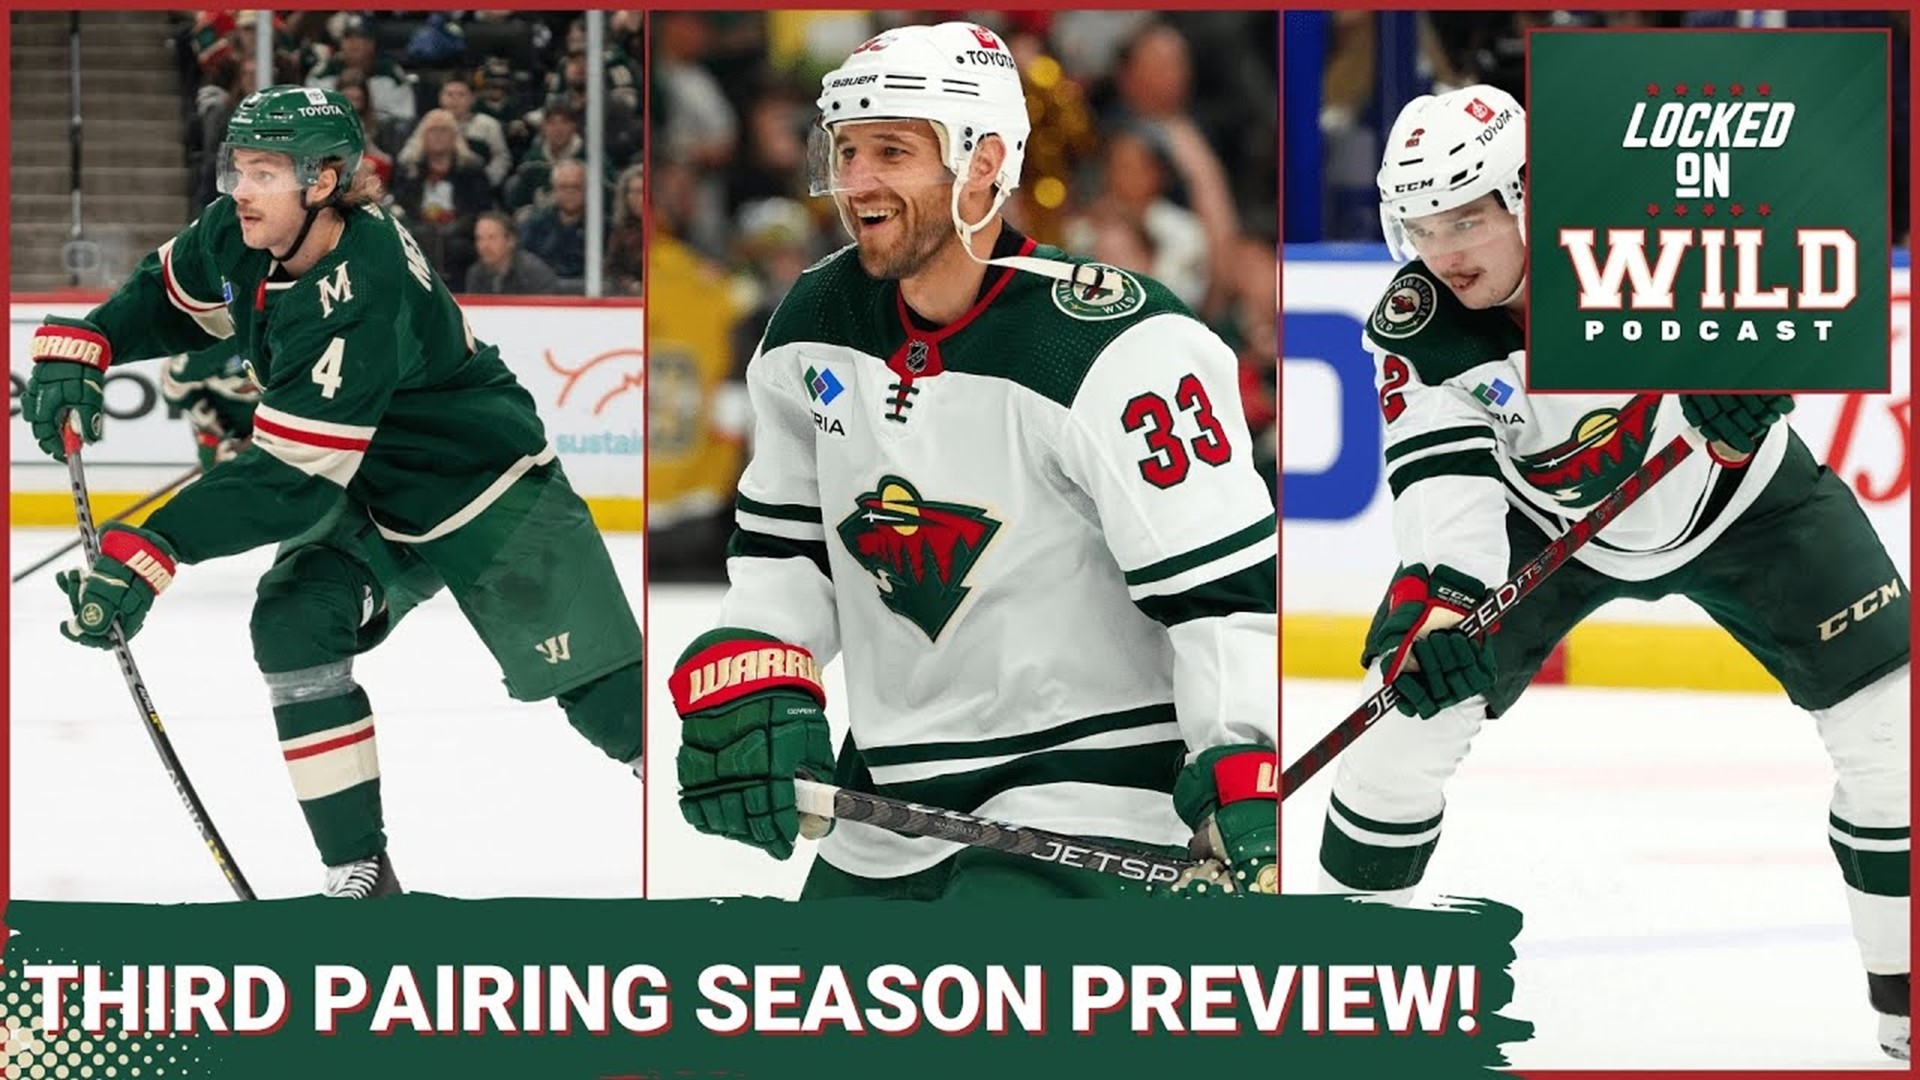 On today's episode of Locked on Wild, we discuss expectations for the 3rd defensive pairing combination of Jon Merrill, Calen Addison and Alex Goligoski.